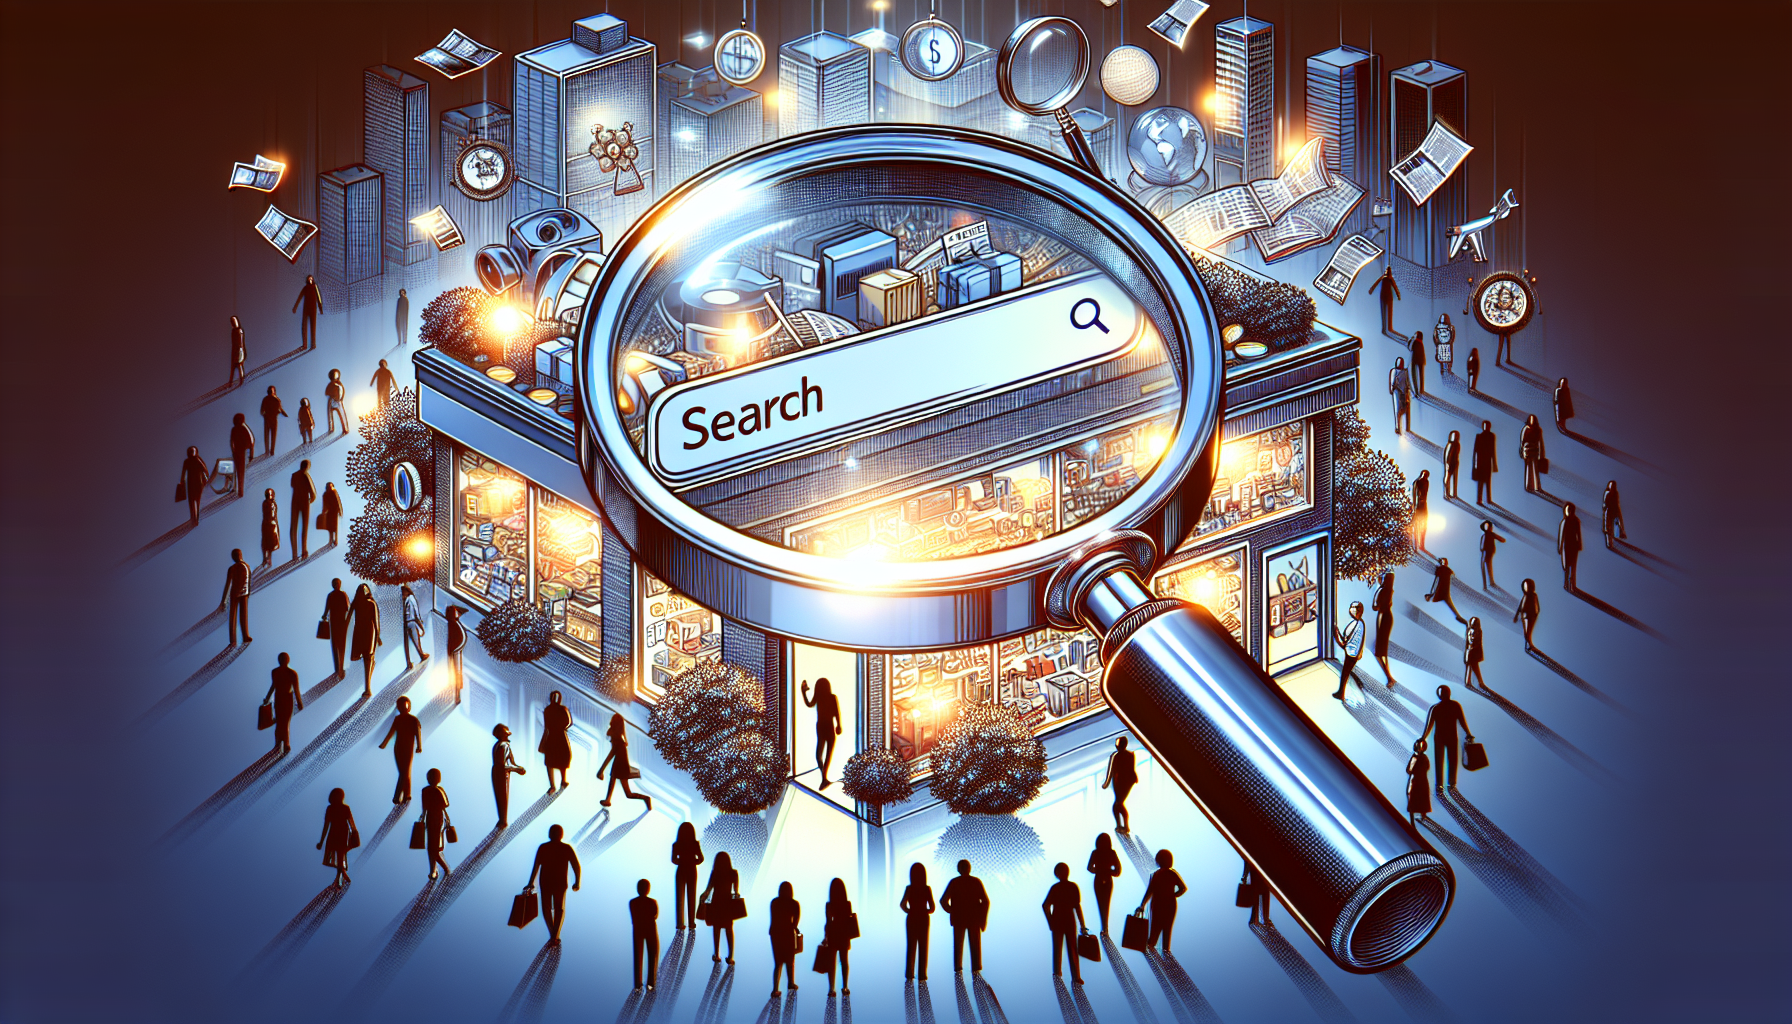 Illustration of a magnifying glass over an ecommerce website, symbolizing the need for ecommerce SEO experts